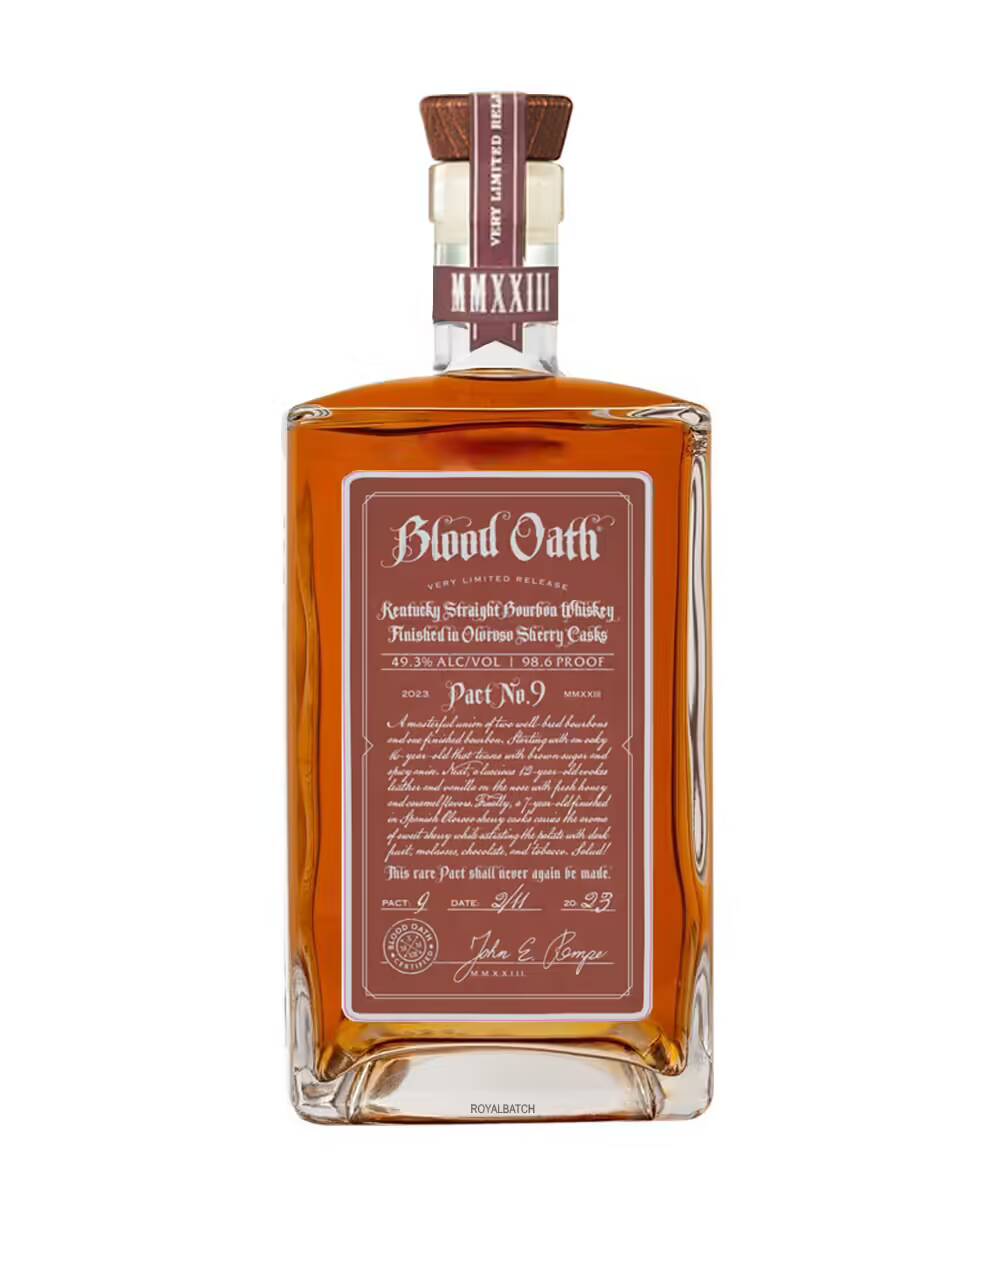 Blood Oath Pact No 9 Finished in 0loroso Sherry Cask 2023 Bourbon Whiskey